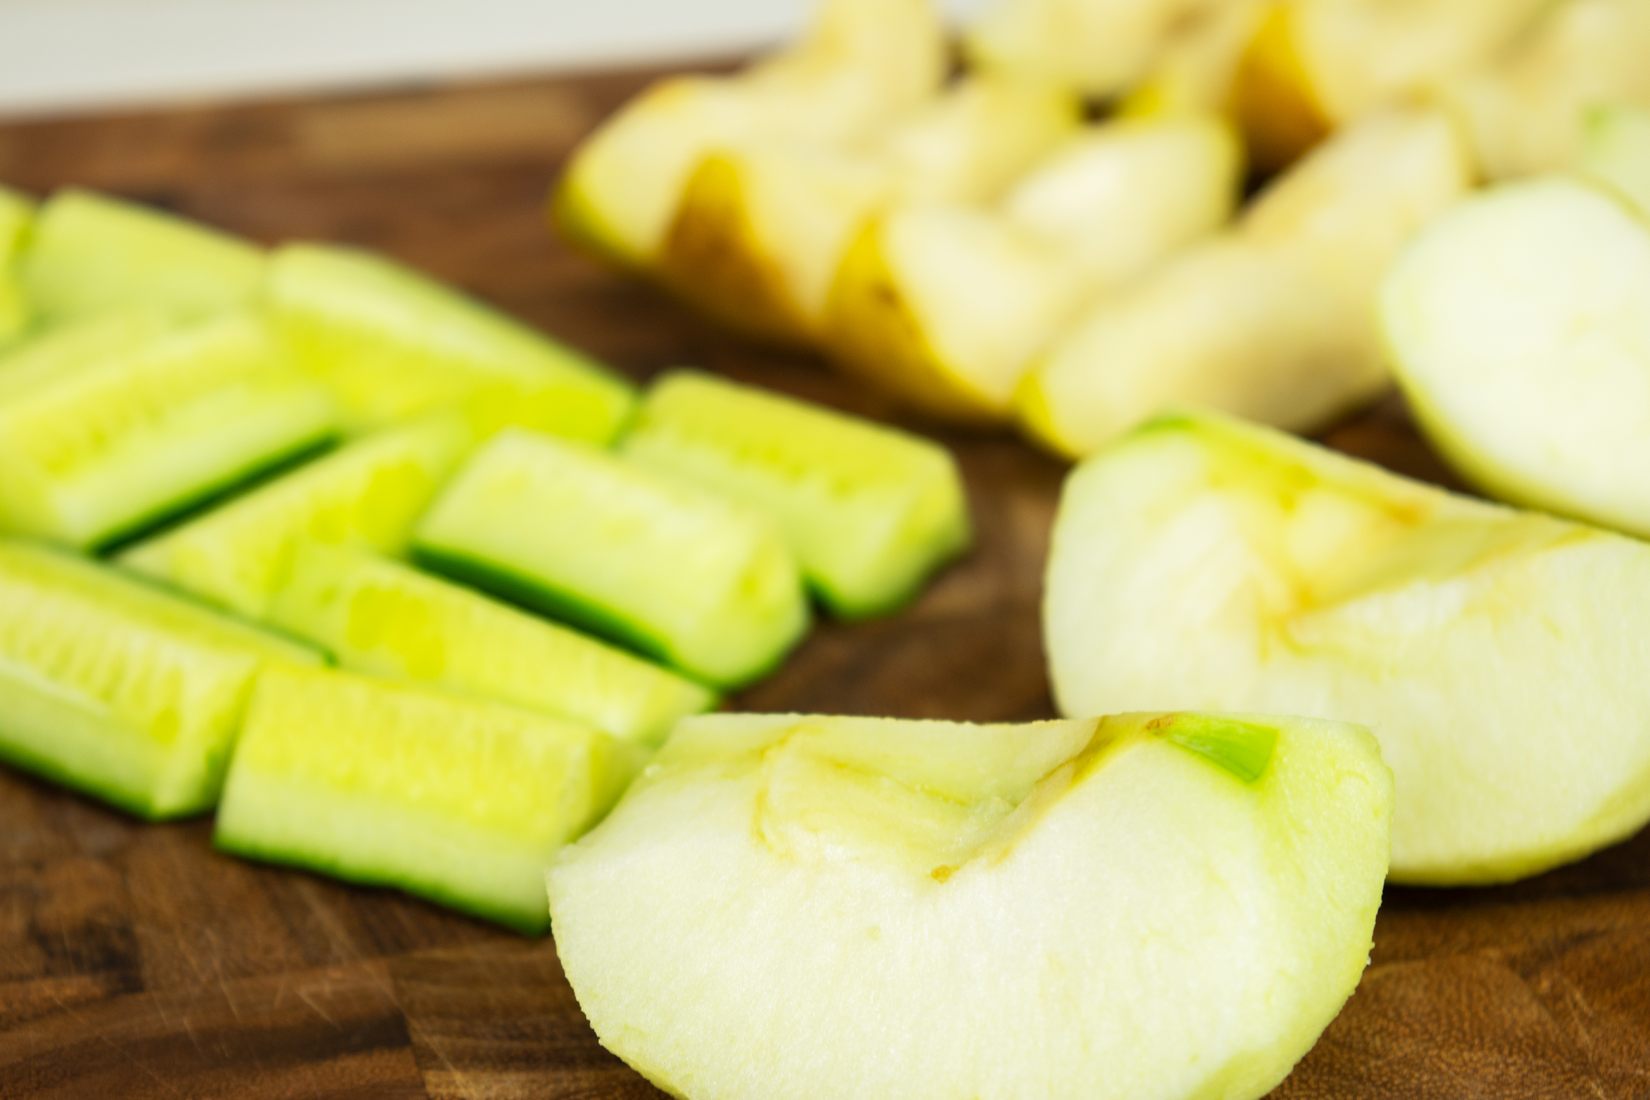 Slice your pears, cucumbers, and apples